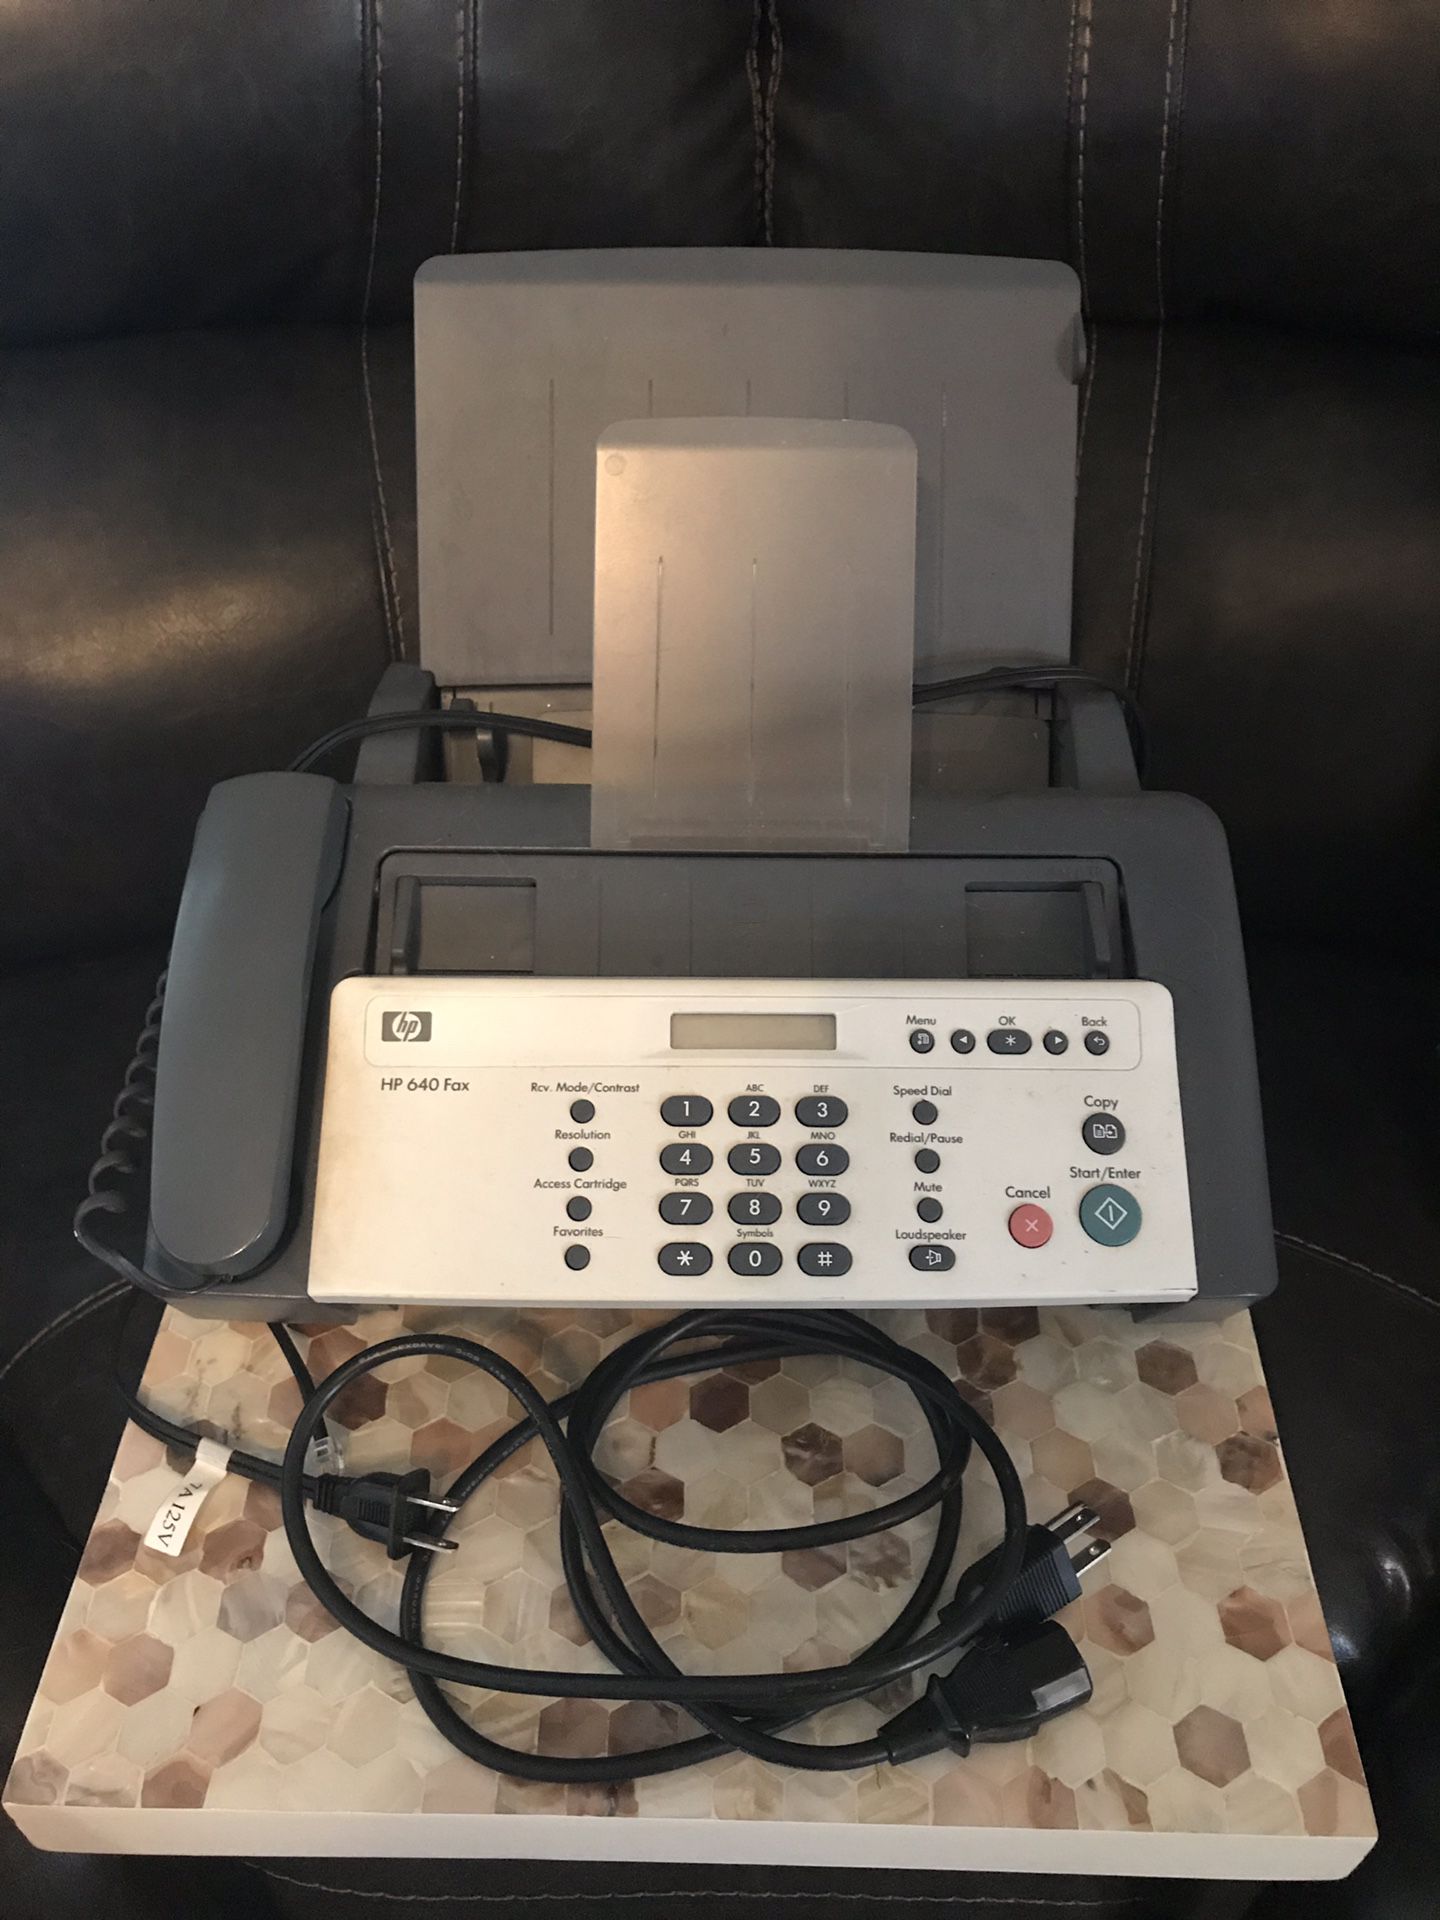 HP 640 Fax All in one! (Fax! Copy! Printer! With Phone!)